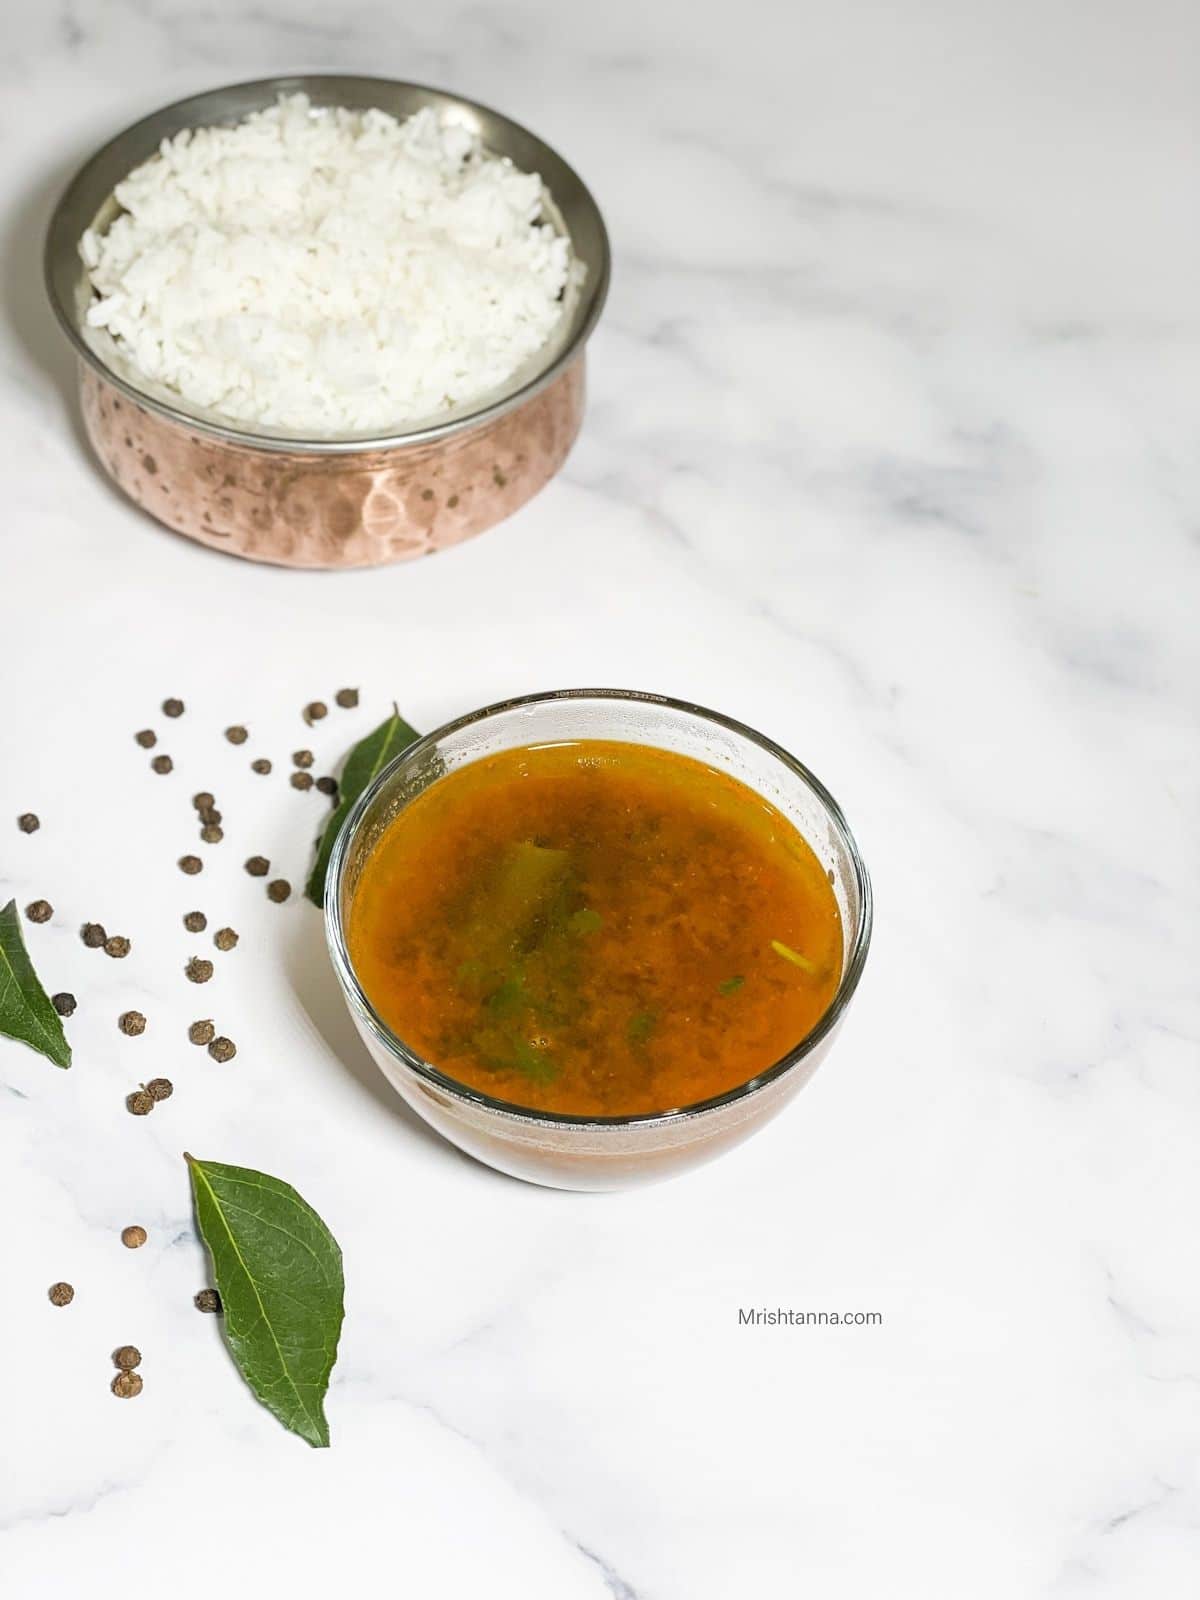 A bowl of pepper rasam is on the table along with sona masoori rice